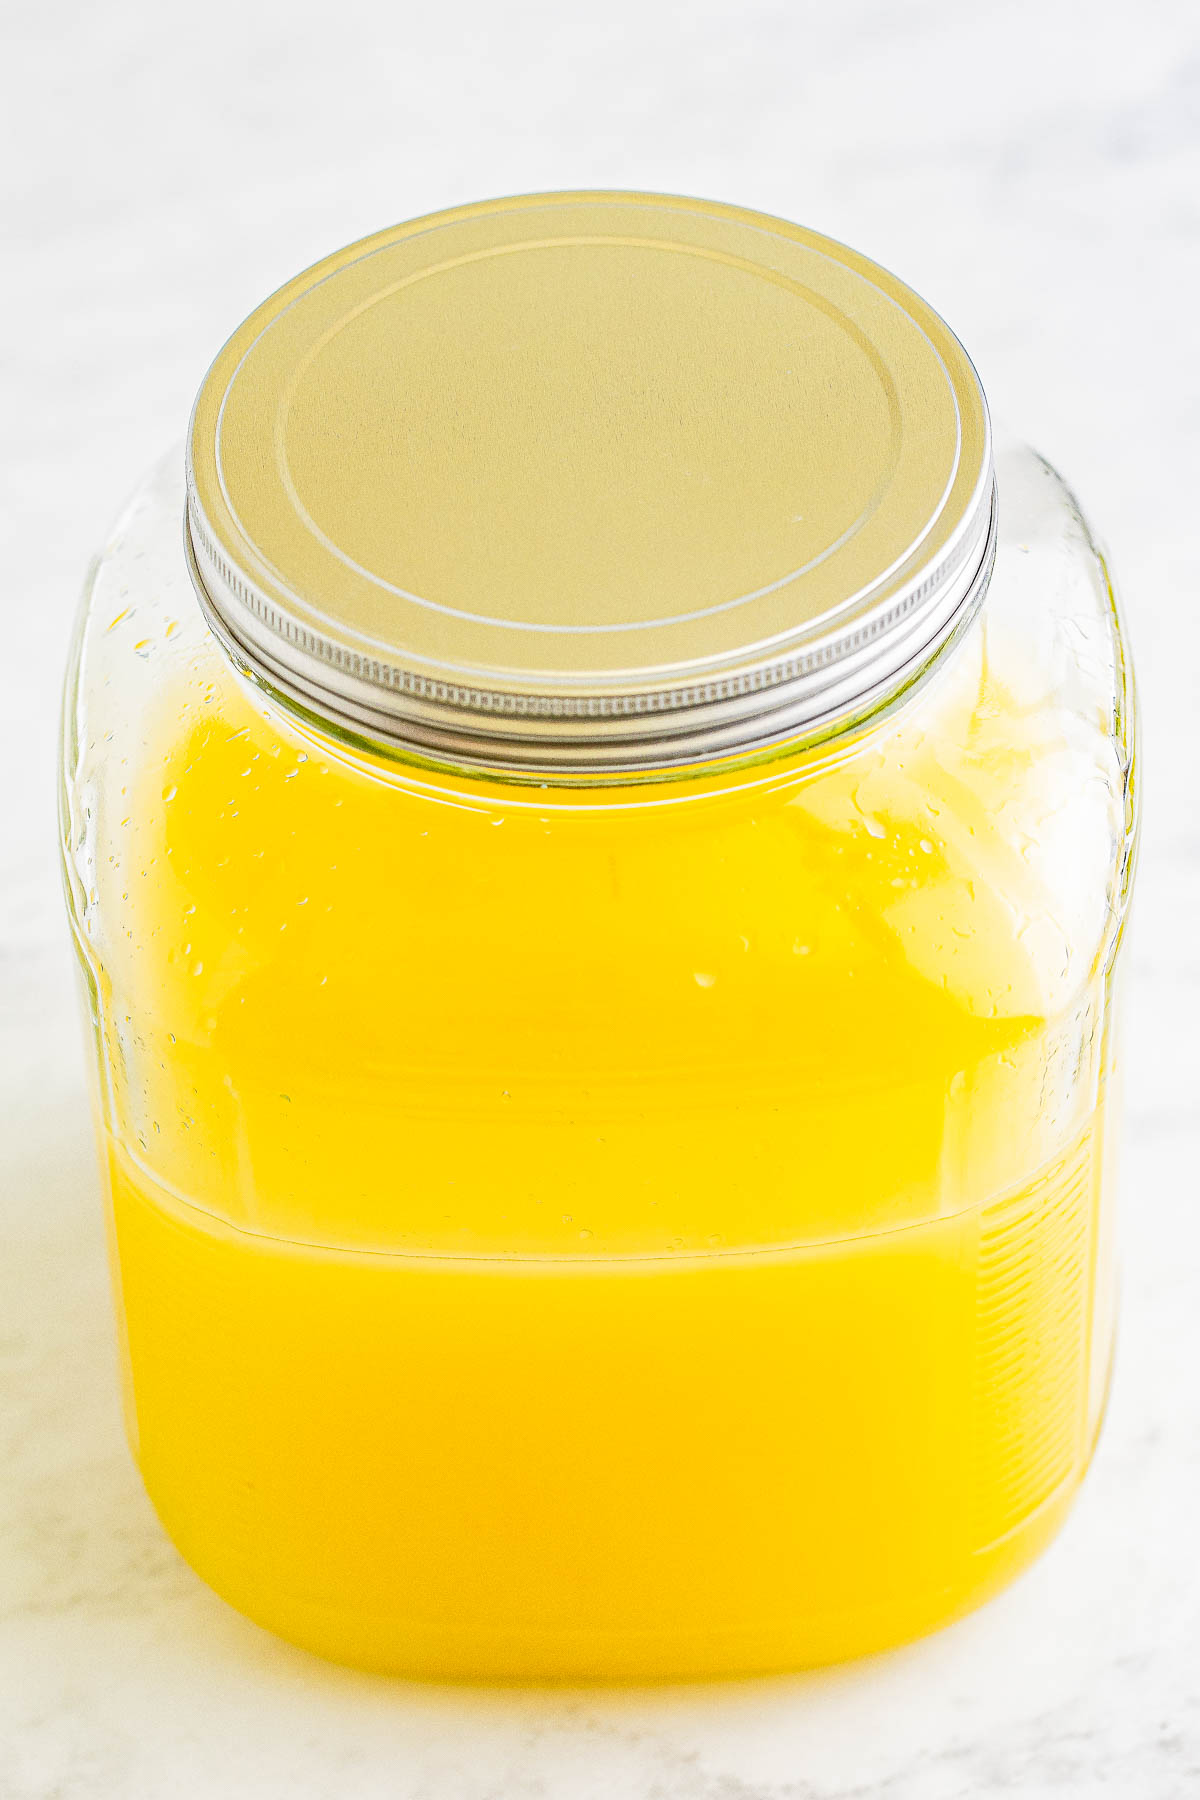 A sealed glass jar filled with freshly made limoncello.